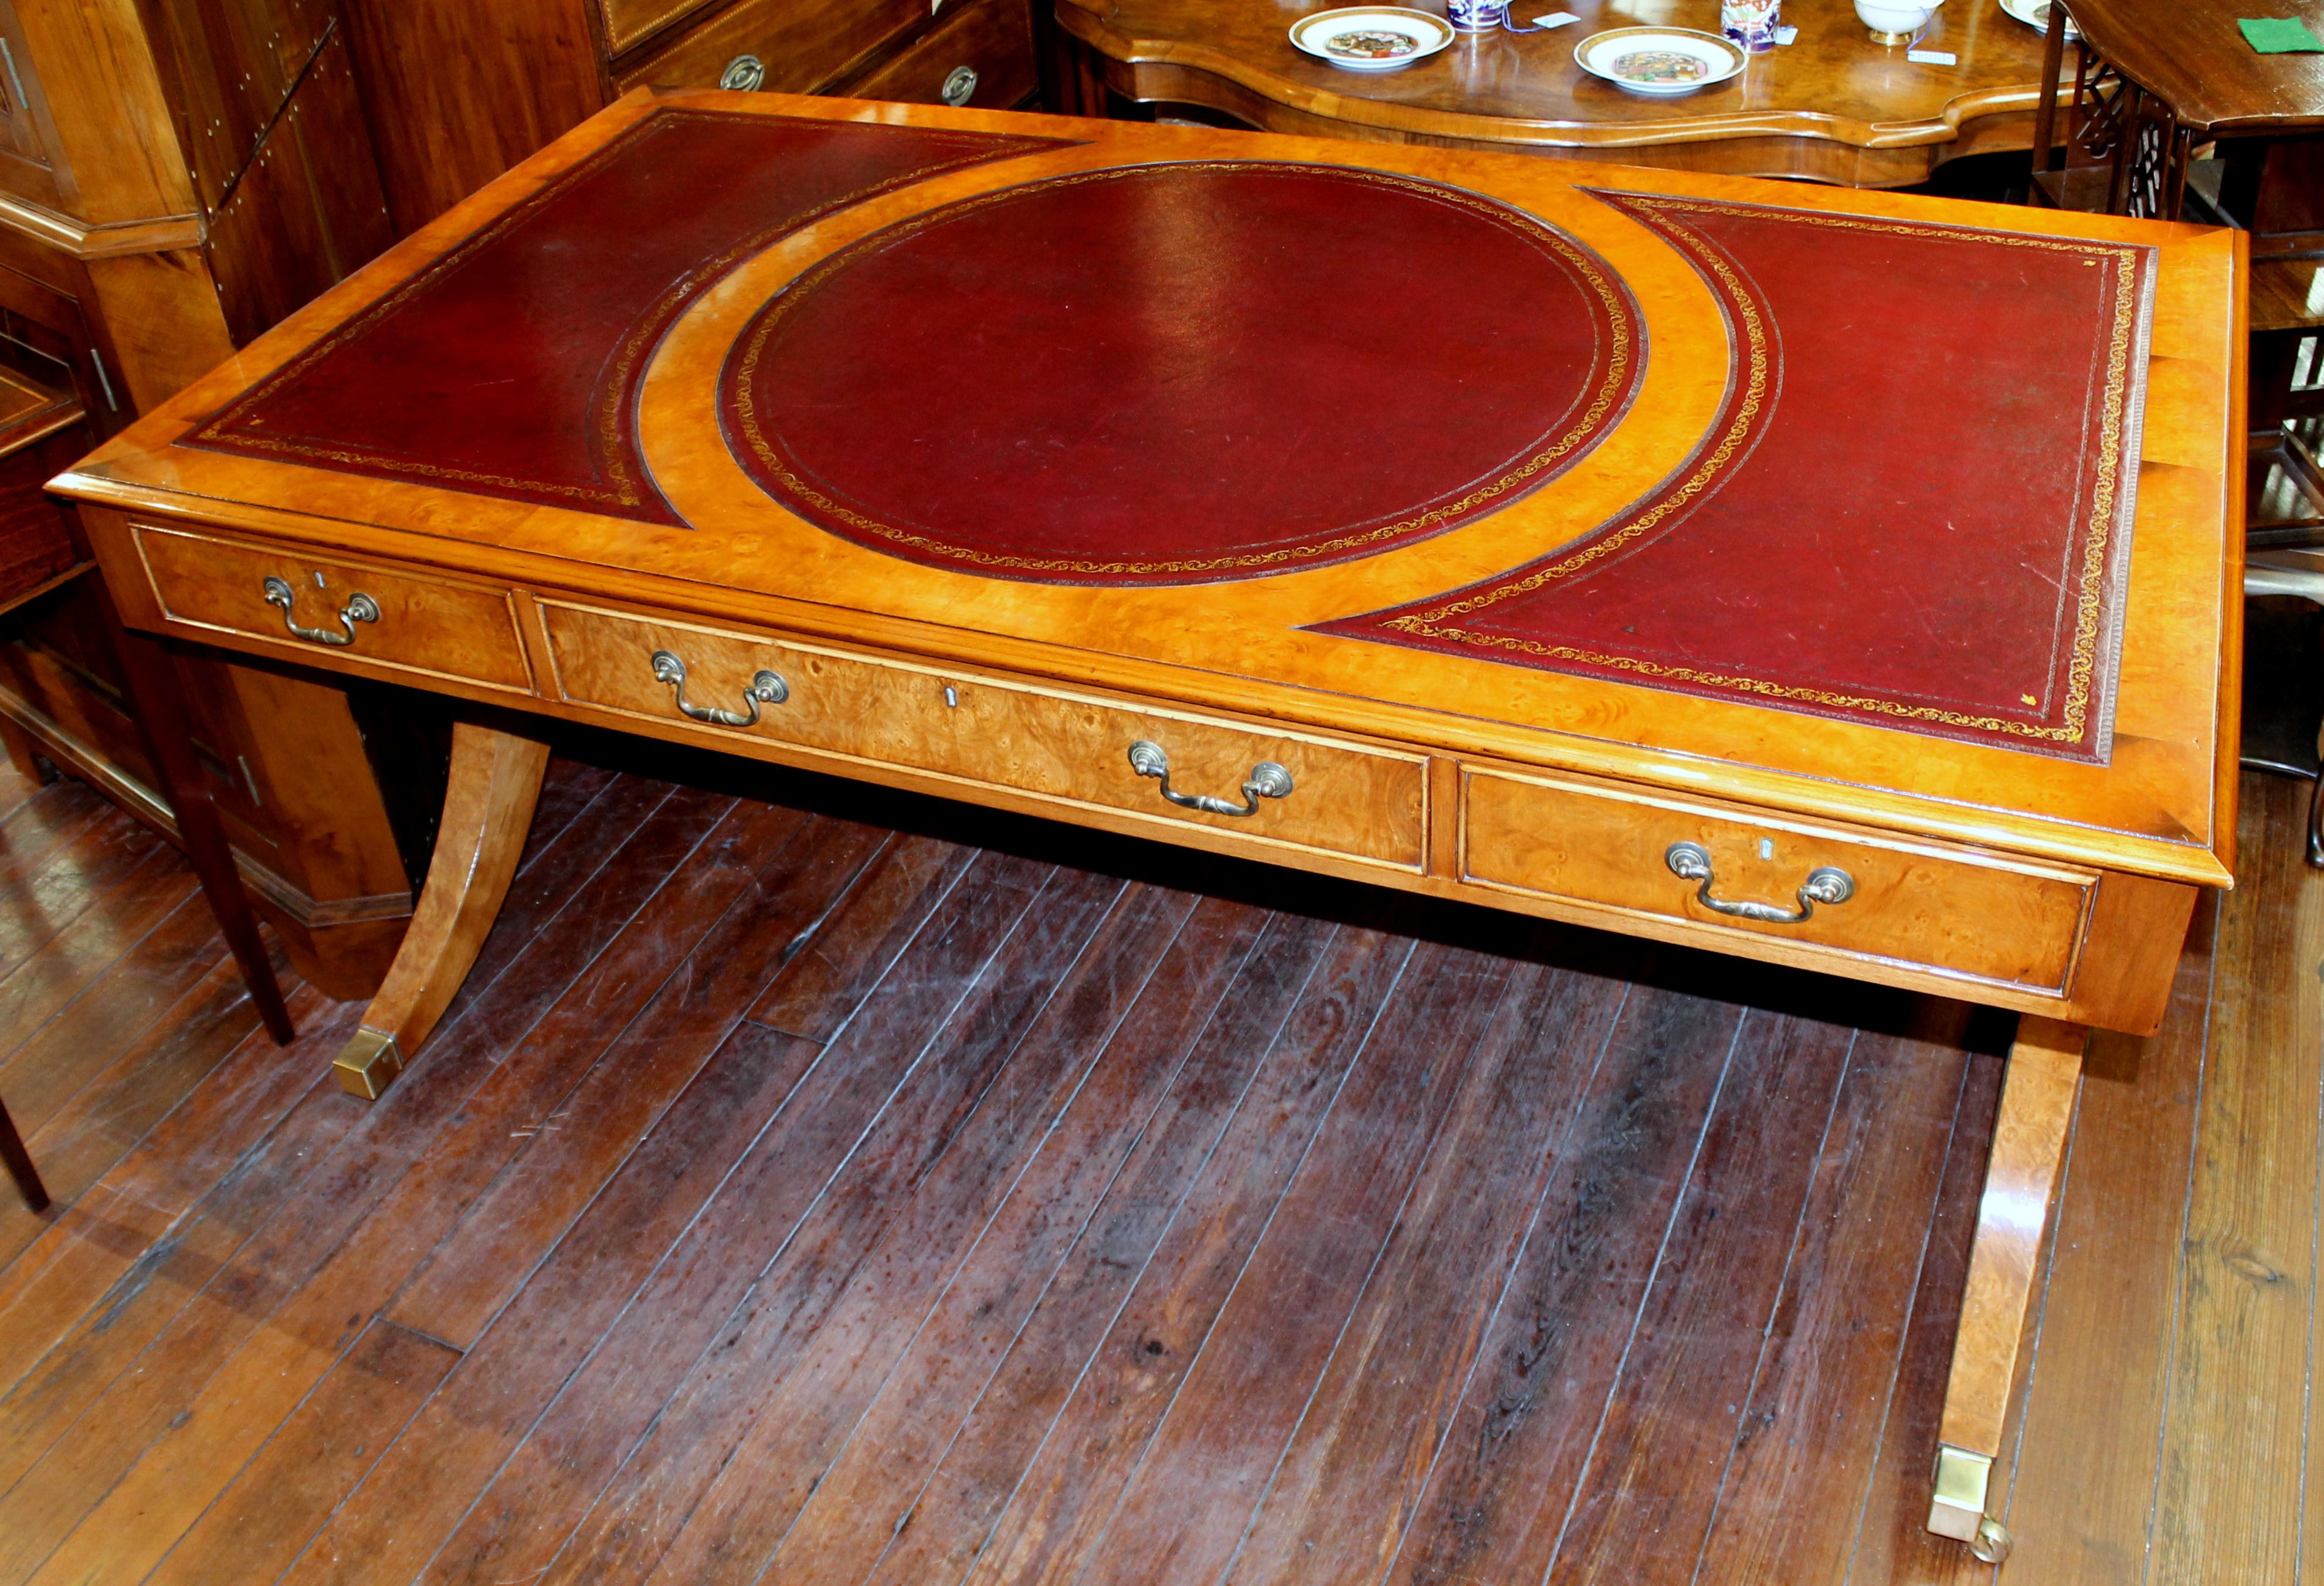 Fabulous quality reproduction English bench made burr elm regency style partner's bureau plat writing table made by our own UK proprietary staff.
Antique copy
With gilt and hand tooled burgundy leather writing surface. Burr elm veneers gleaned